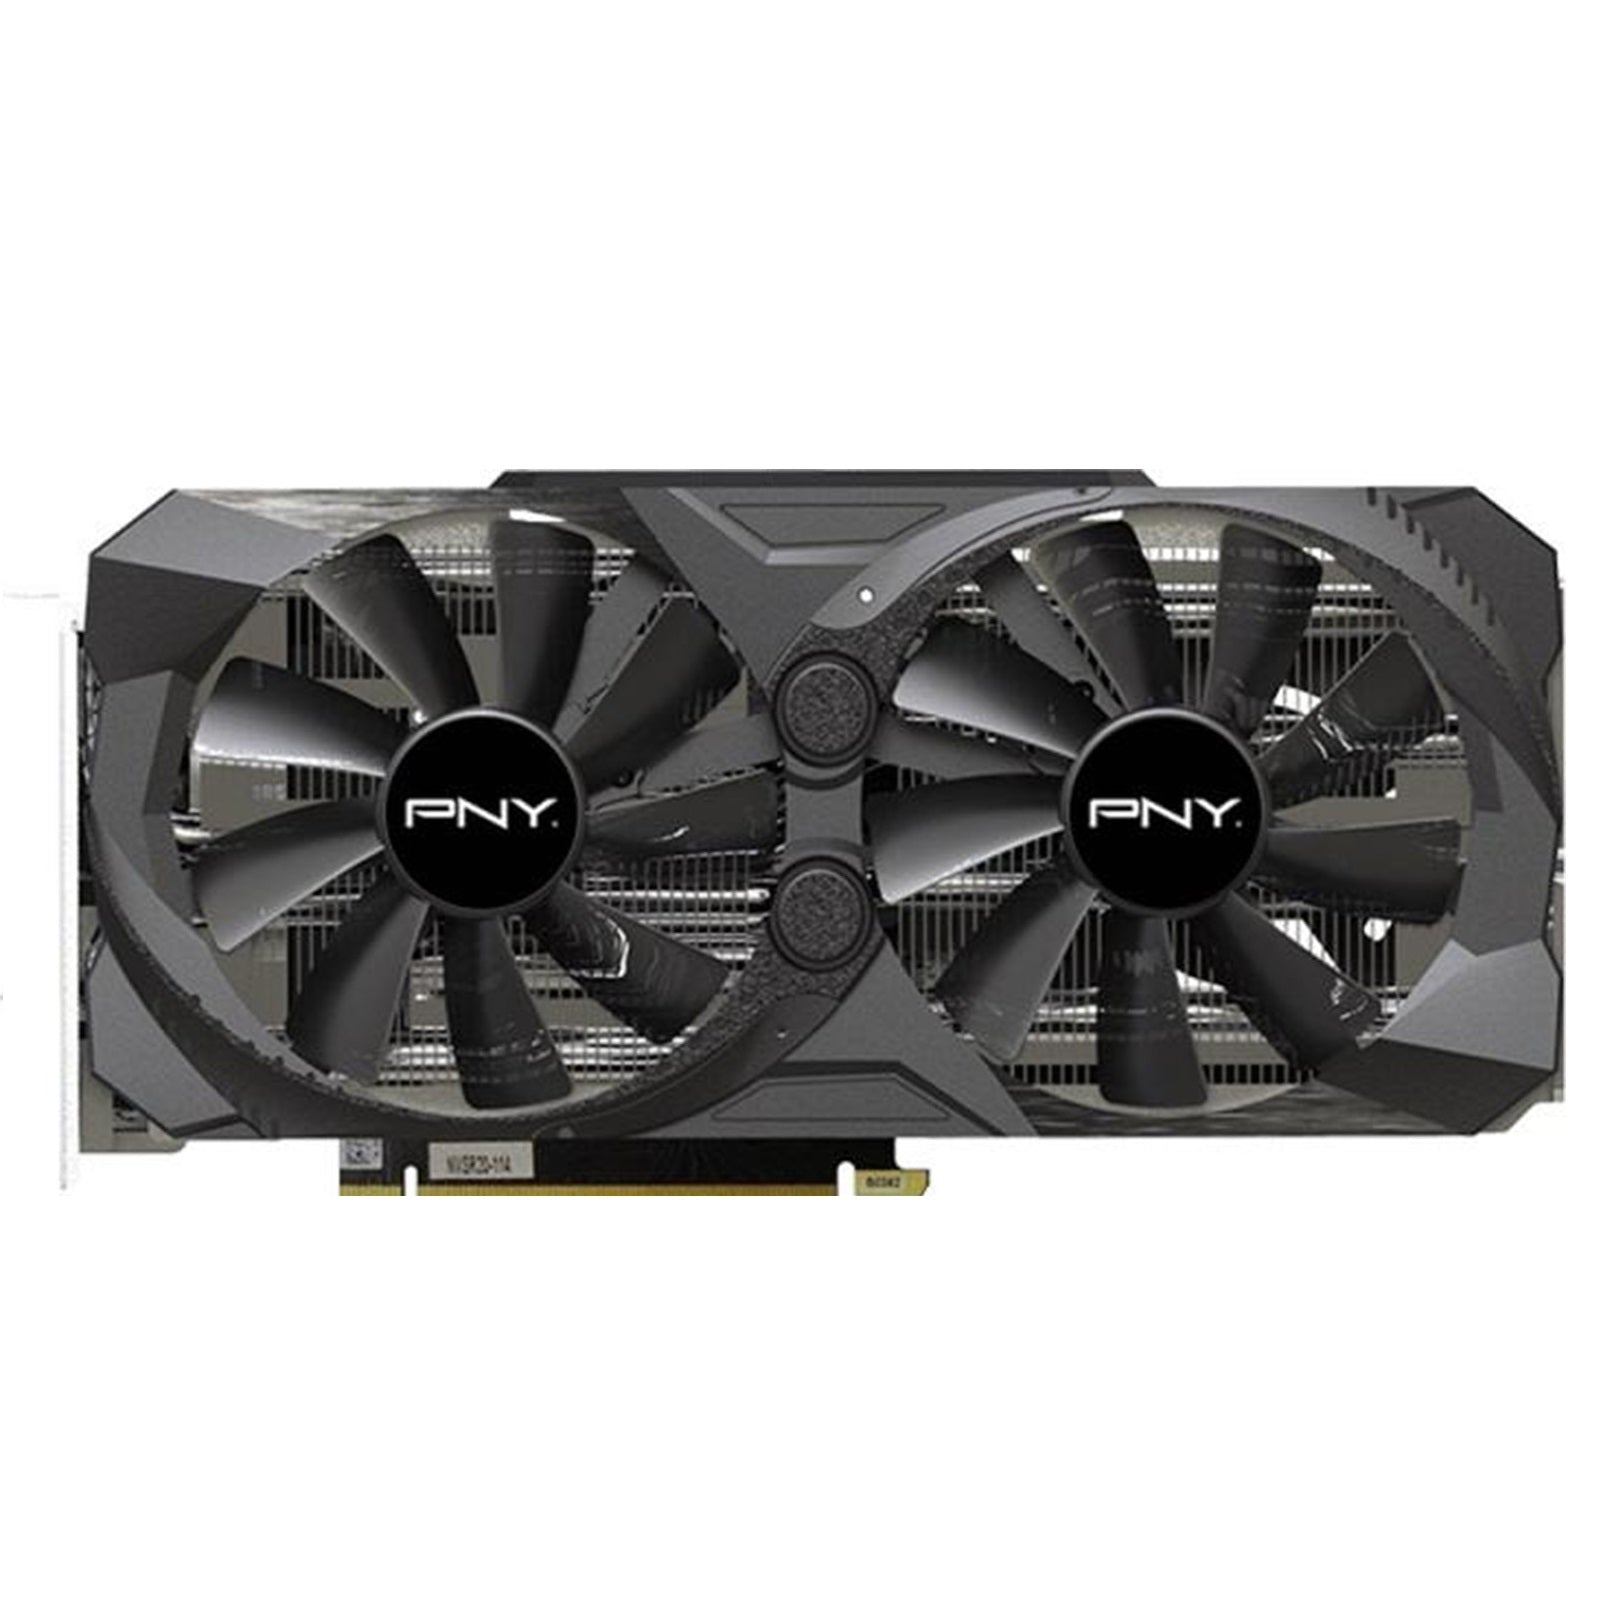 MANLI GeForce RTX 3070 LHR Fan Replacement